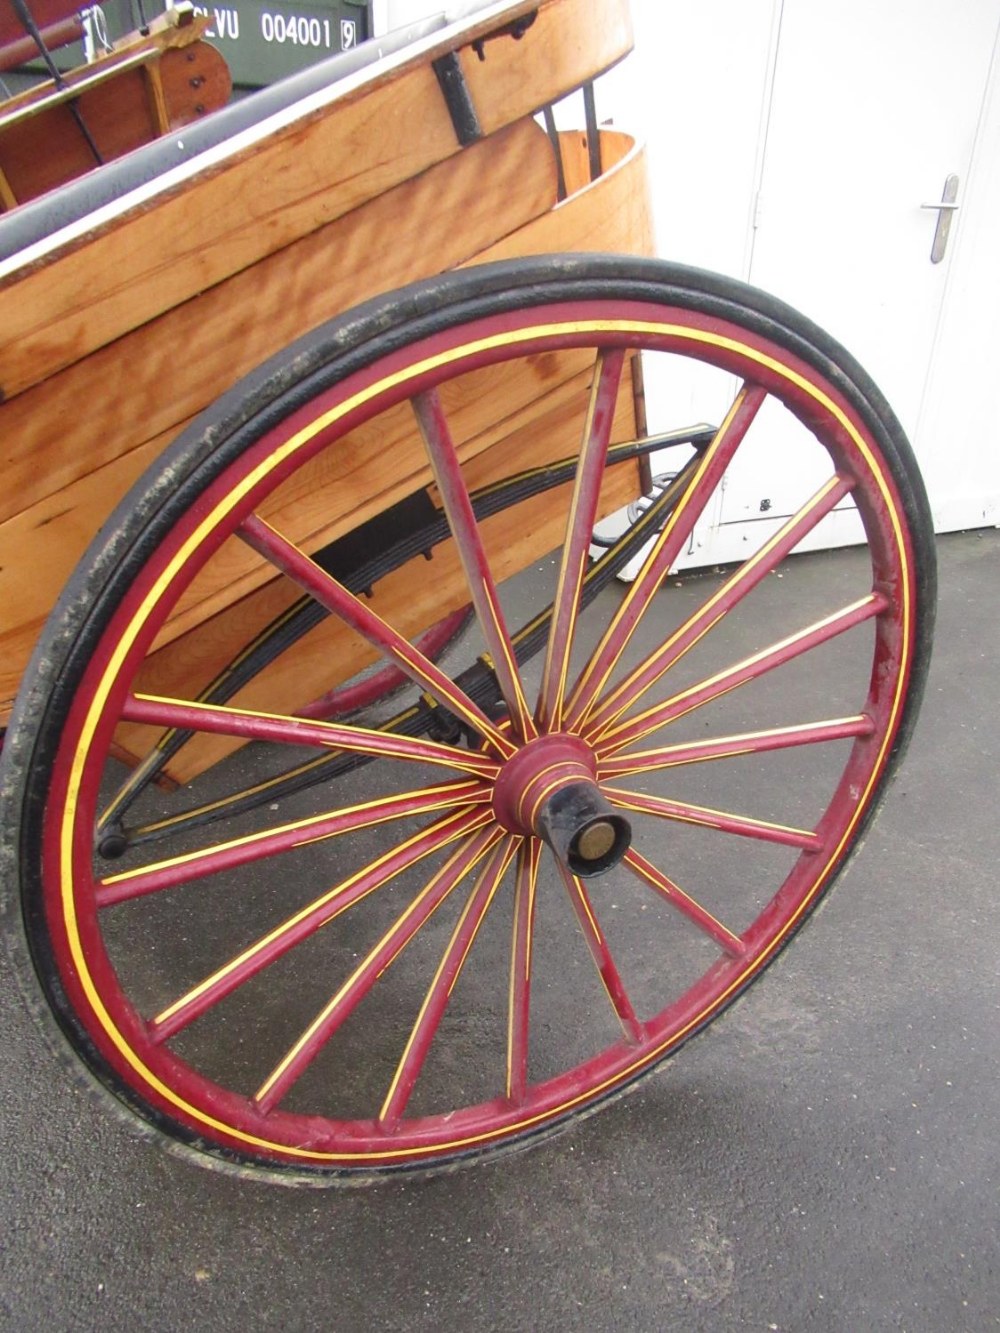 Croft & Blackburn of Ripon governess cart, painted in traditional livery, wheel approx D120cm - Image 3 of 3